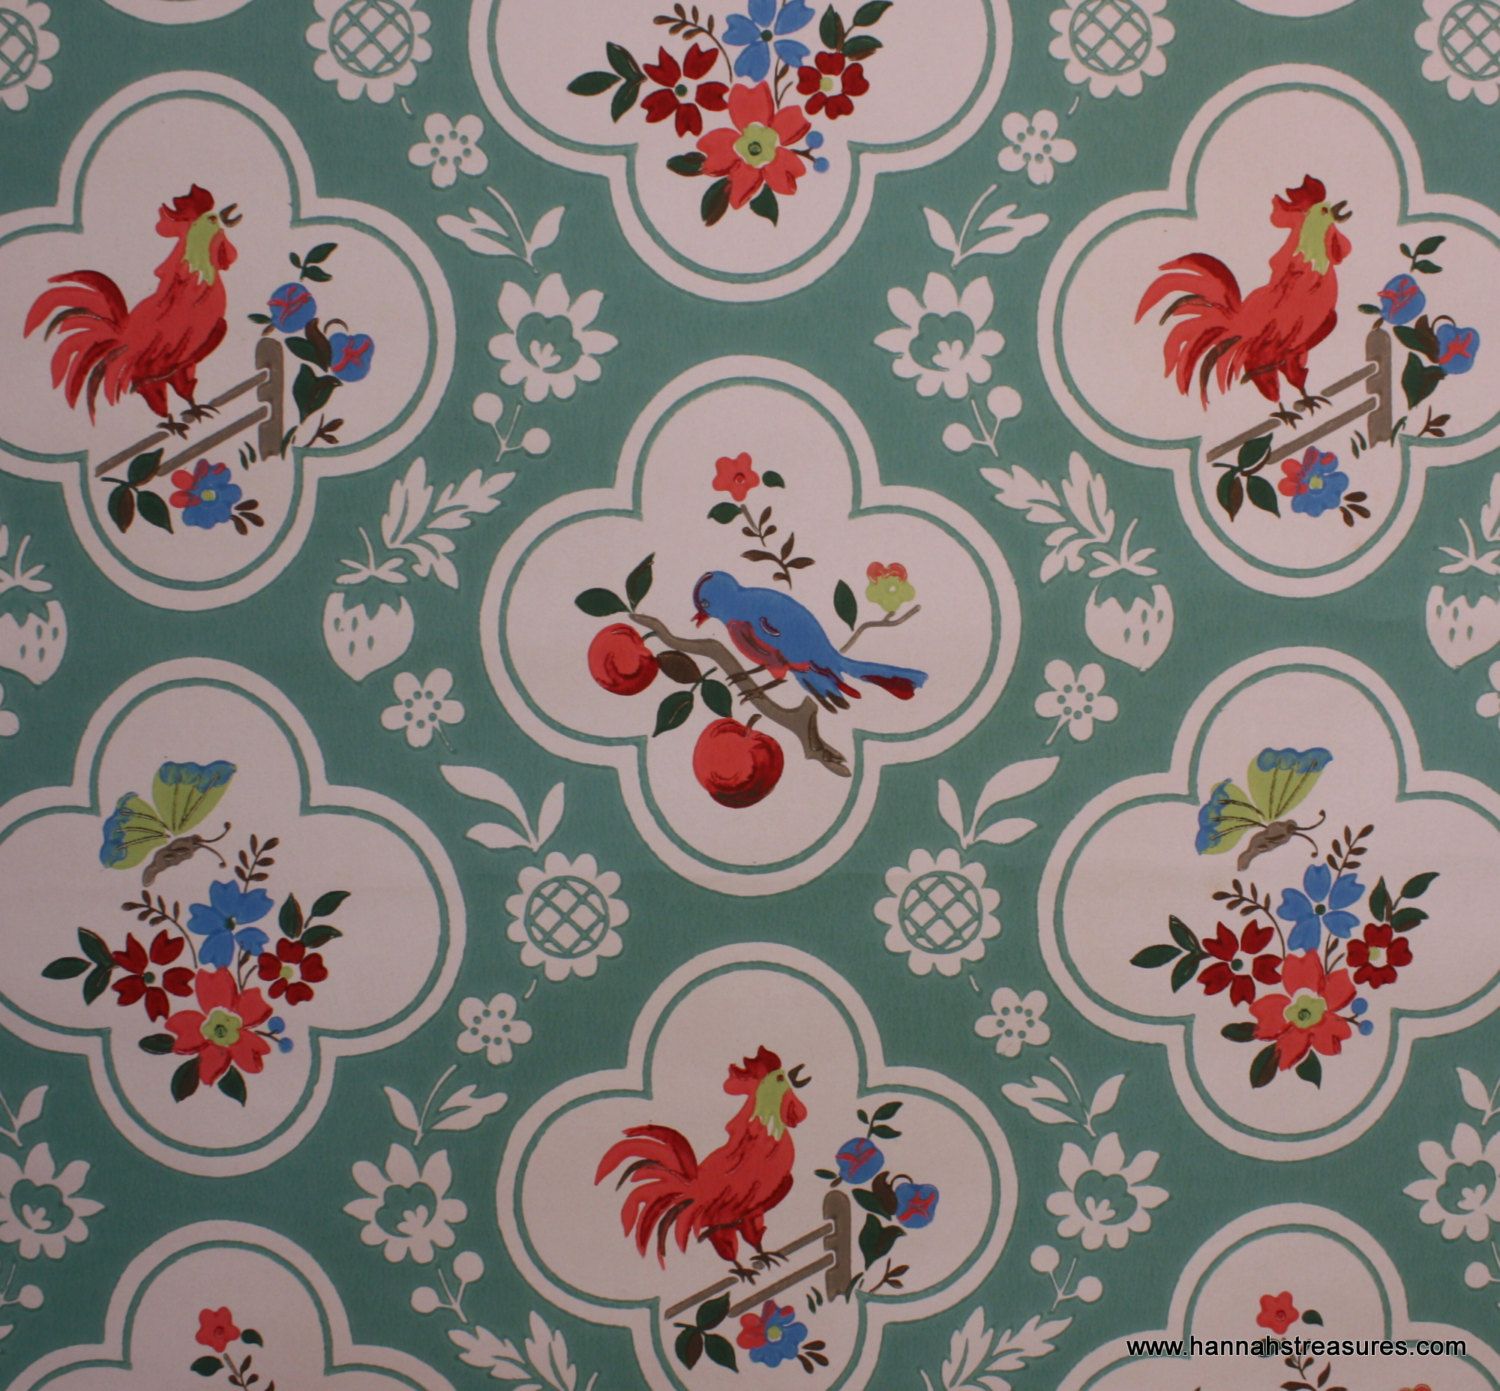 1940's Vintage Wallpaper Red and Aqua with birds cherries roosters